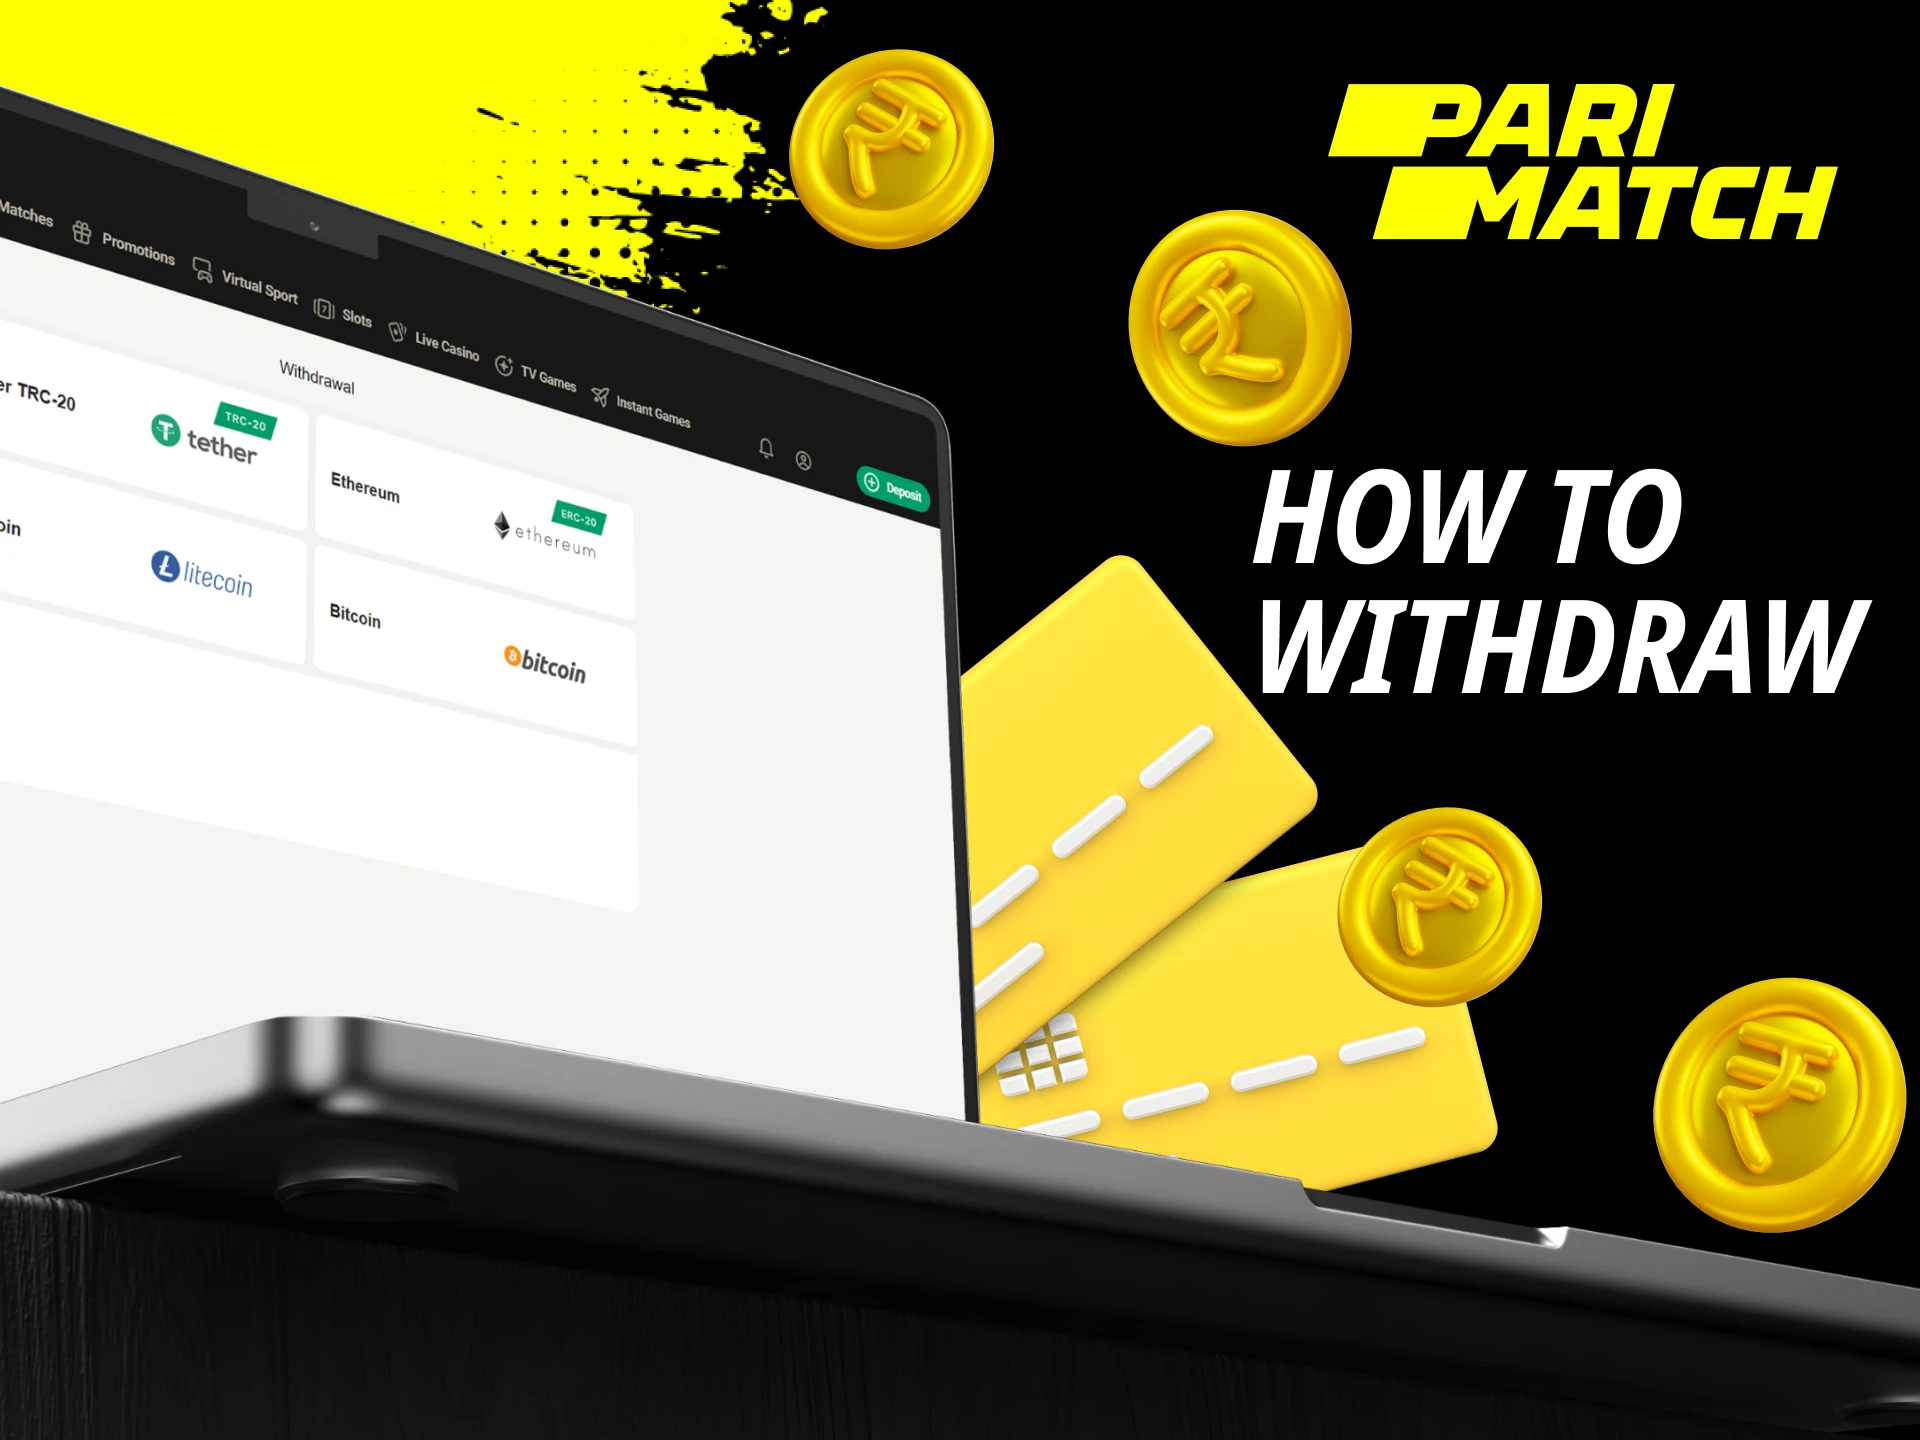 How can I withdraw money from my account on the Parimatch online casino website.